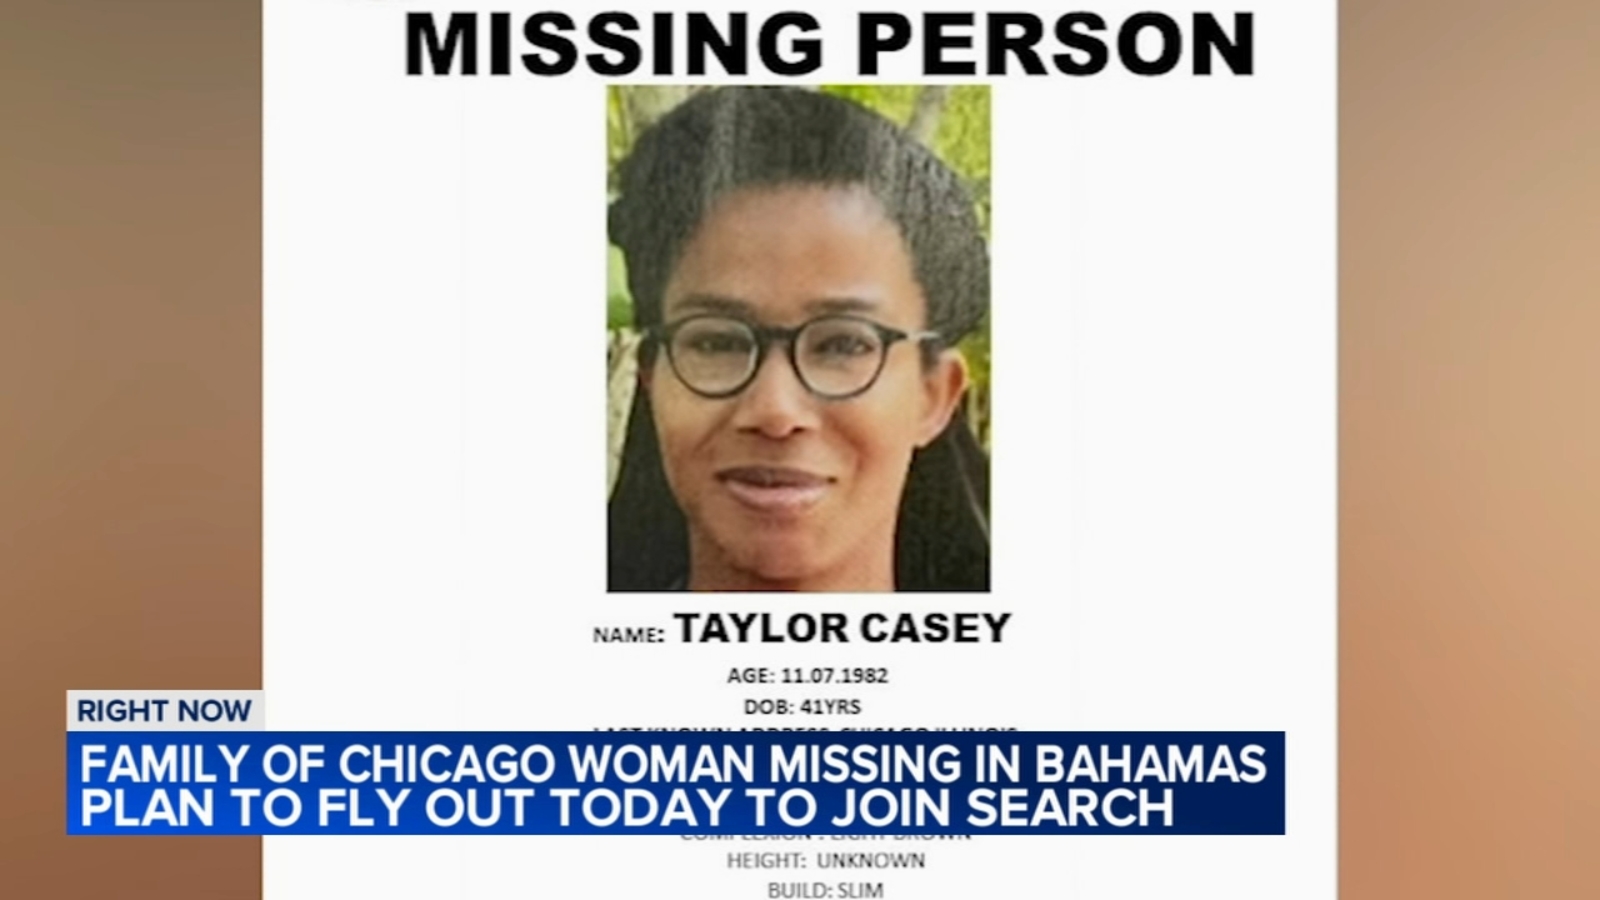 Family of missing Chicago woman Taylor Casey traveling to Bahamas to join search effort [Video]